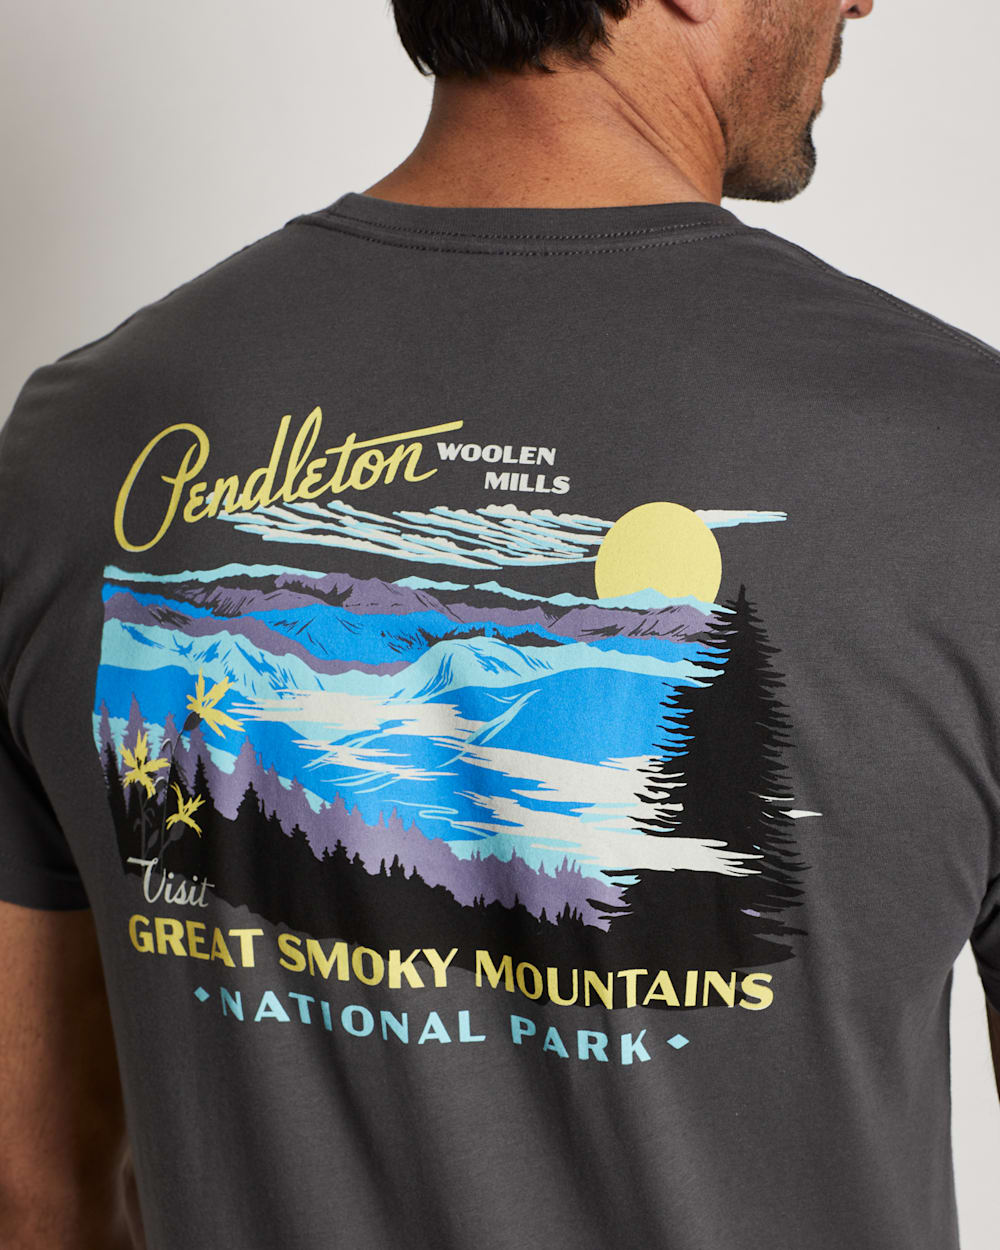 ALTERNATE VIEW OF MEN'S GREAT SMOKEY MOUNTAINS GRAPHIC TEE IN GREY/YELLOW image number 4